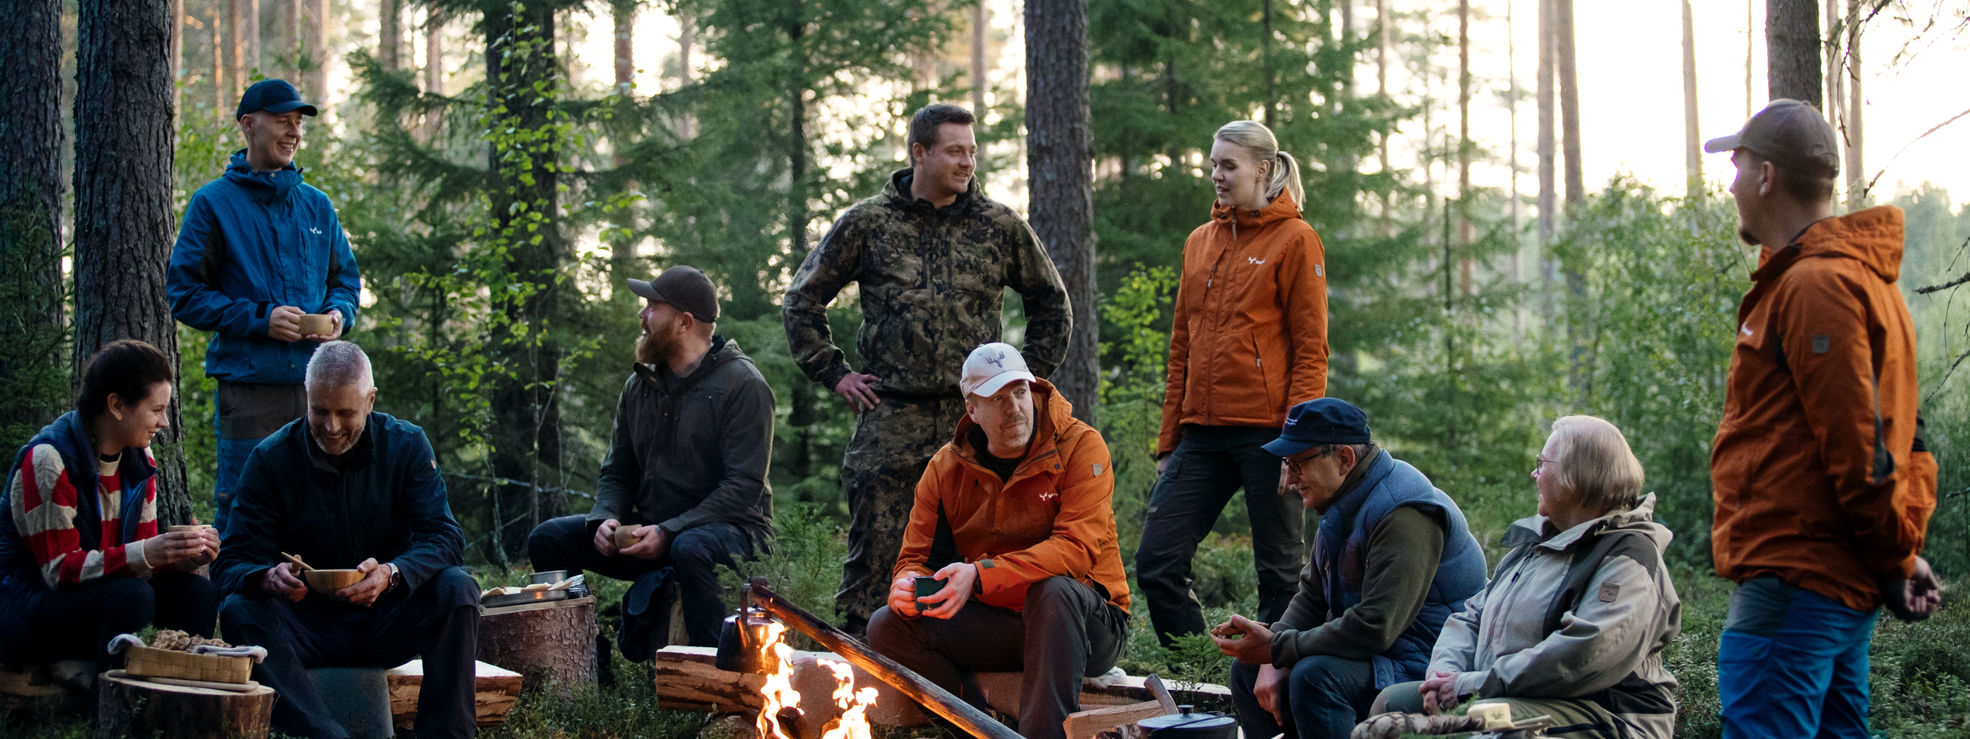 Owner-members drinking coffee and enjoying snacks around a campfire.